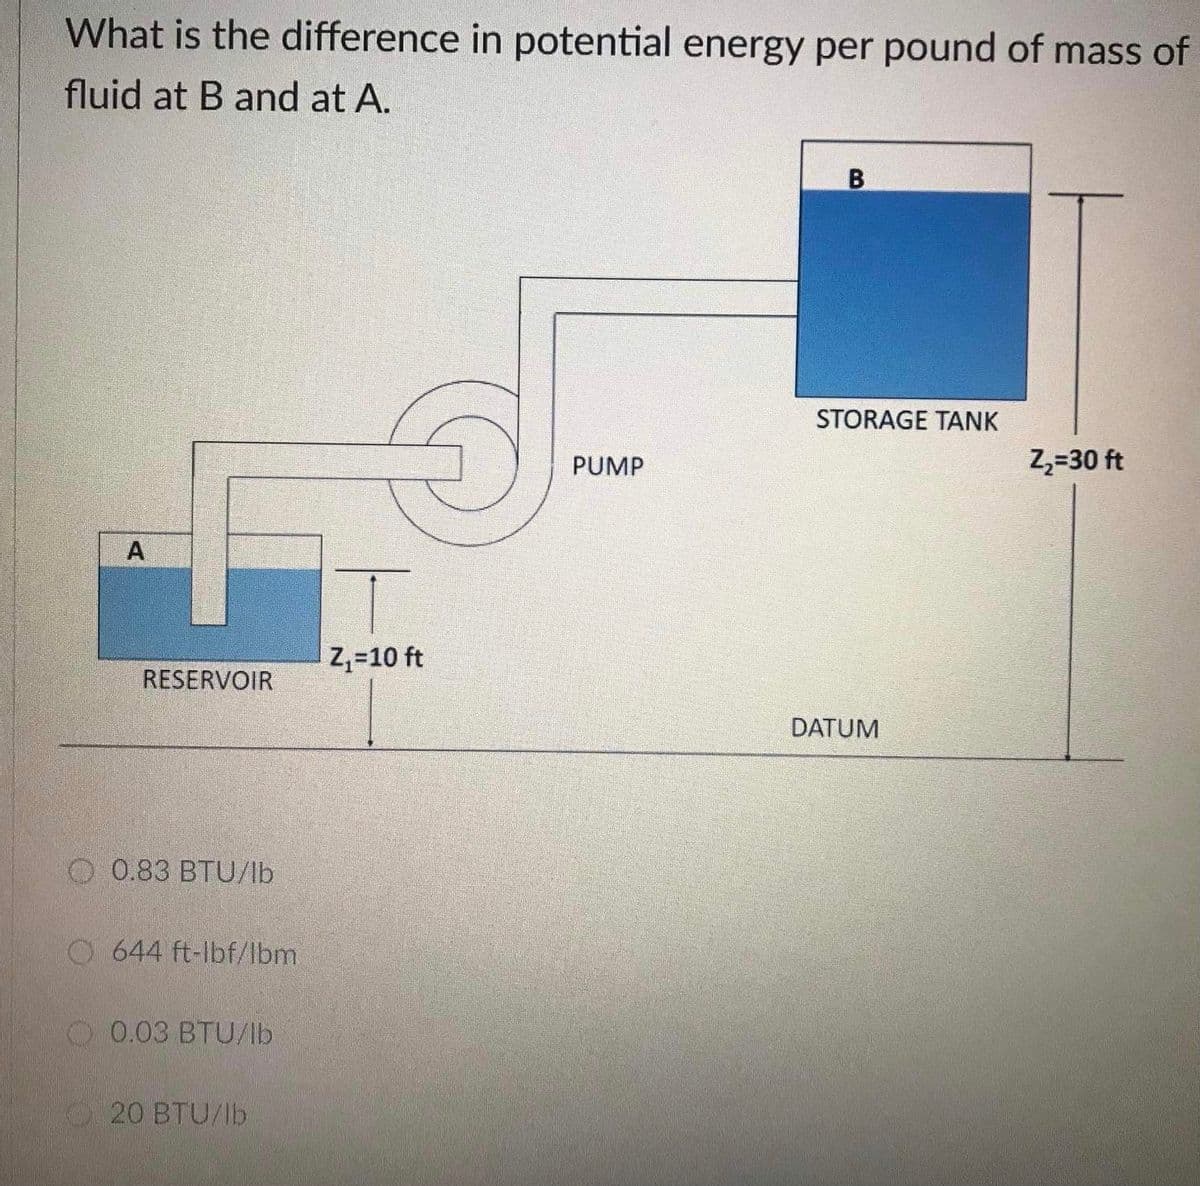 What is the difference in potential energy per pound of mass of
fluid at B and at A.
STORAGE TANK
PUMP
Z,=30 ft
A
2,=10 ft
RESERVOIR
DATUM
0.83 BTU/Ib
O 644 ft-lbf/lbm
0.03 BTU/Ib
20 BTU/Ib
